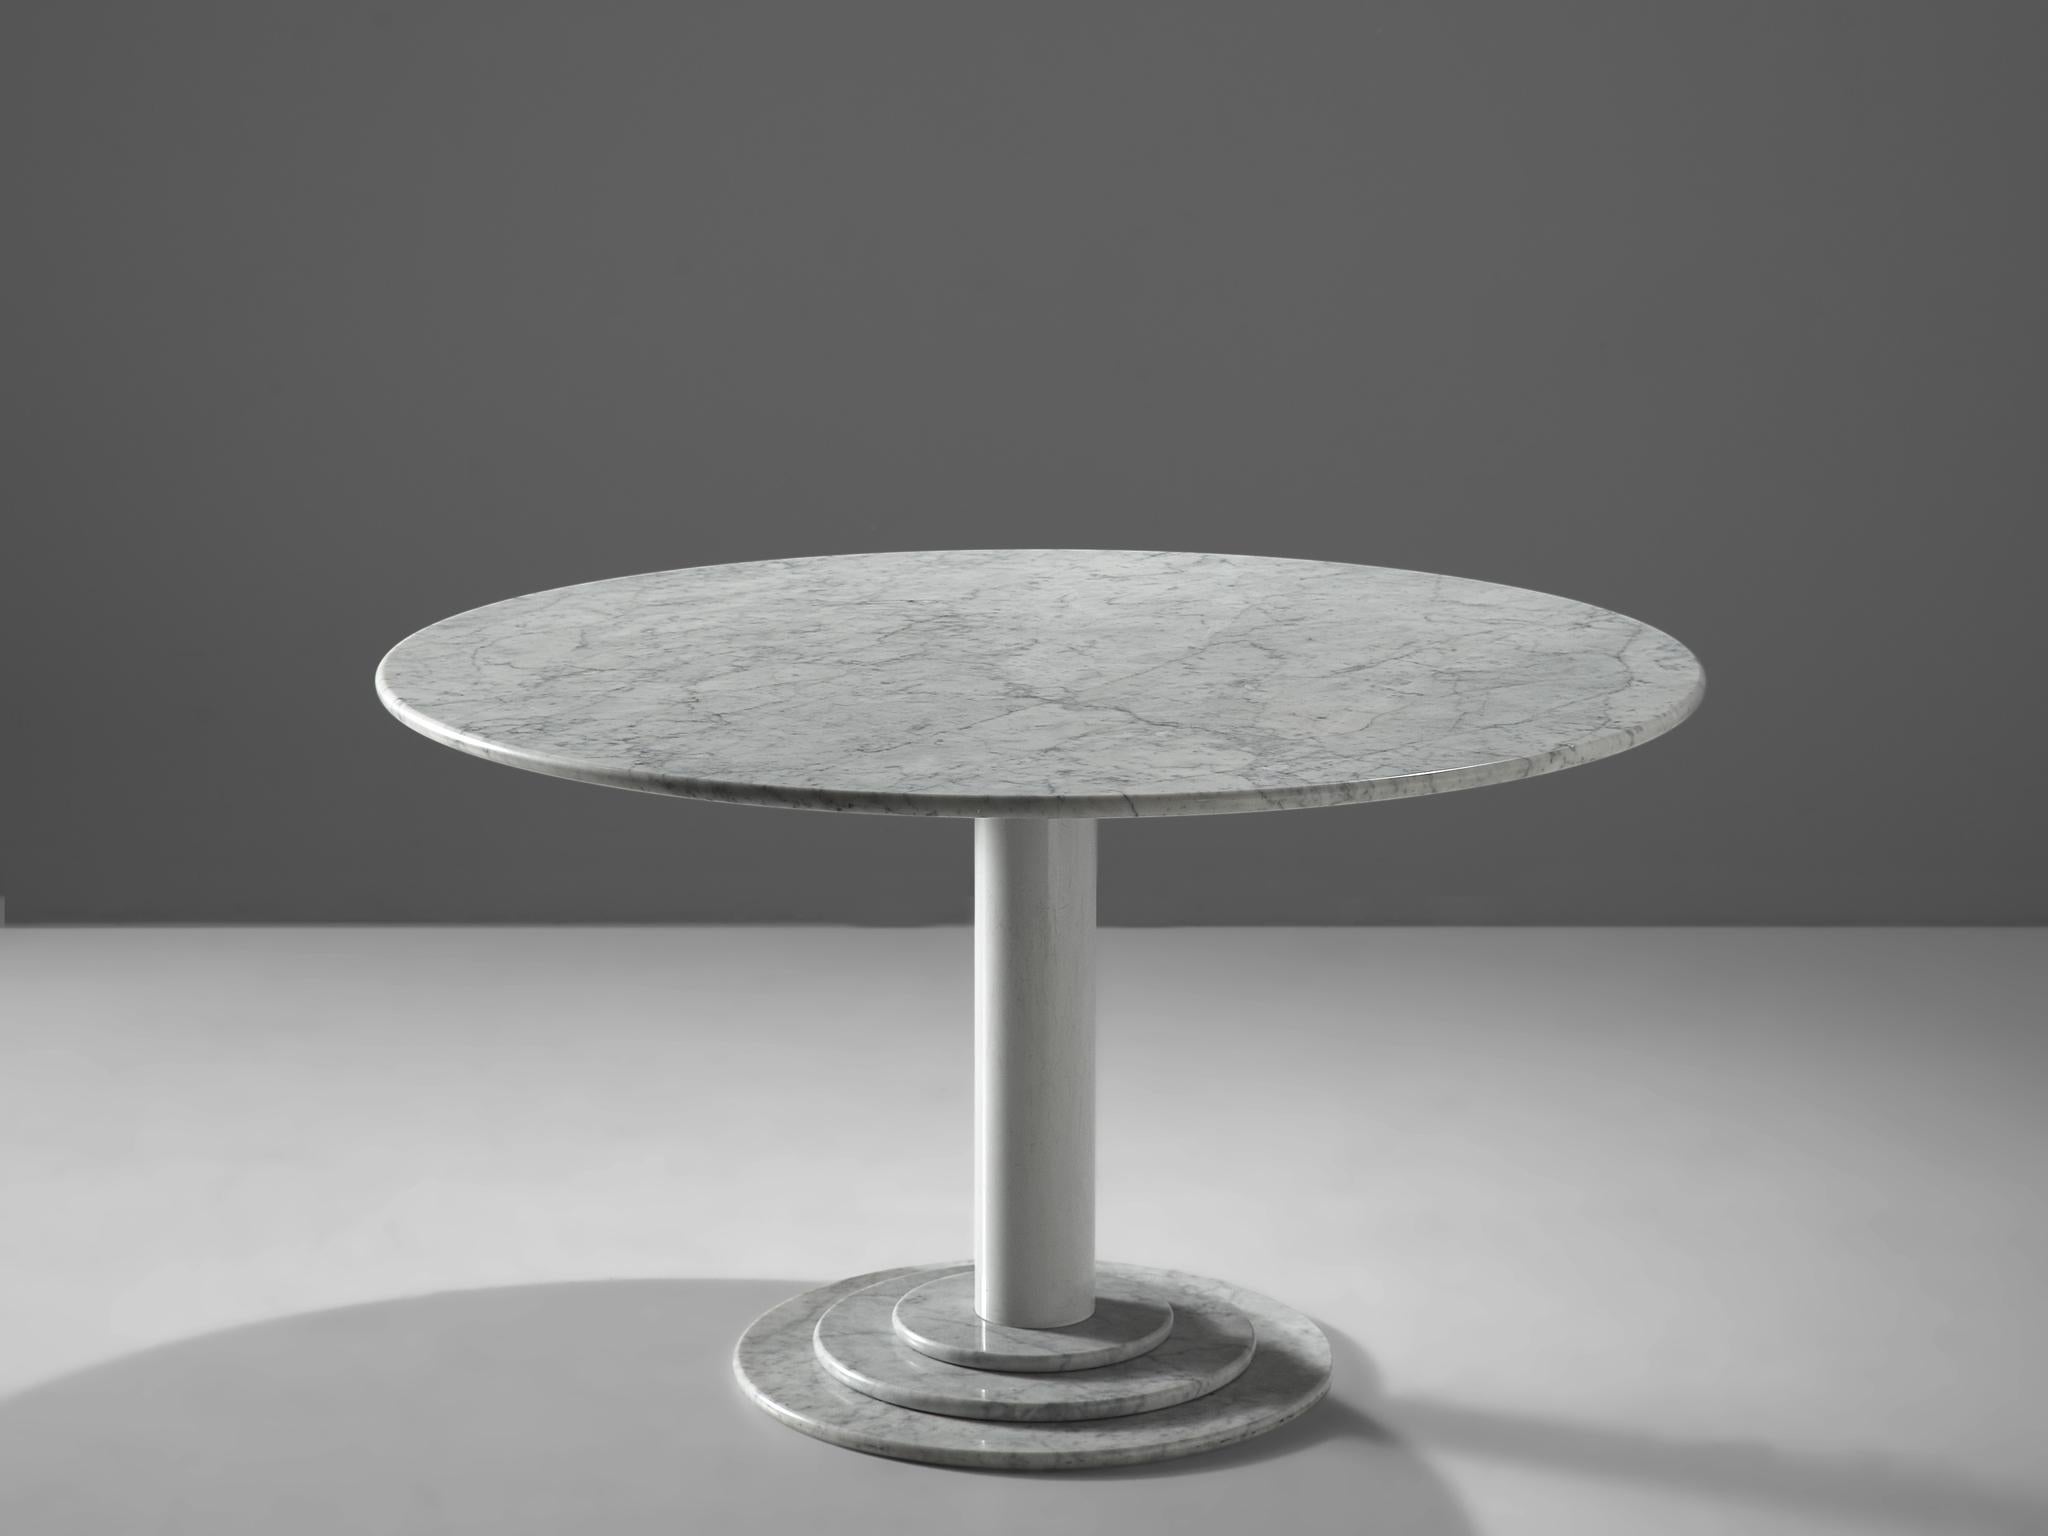 Round dining table, white marble, Italy, 1970s

This table is a skillful example of Postmodern design. A white lacquered metal pedestal with a marble foot holds a round marble table top. A great classic designed in the style of Acerbis. The foot